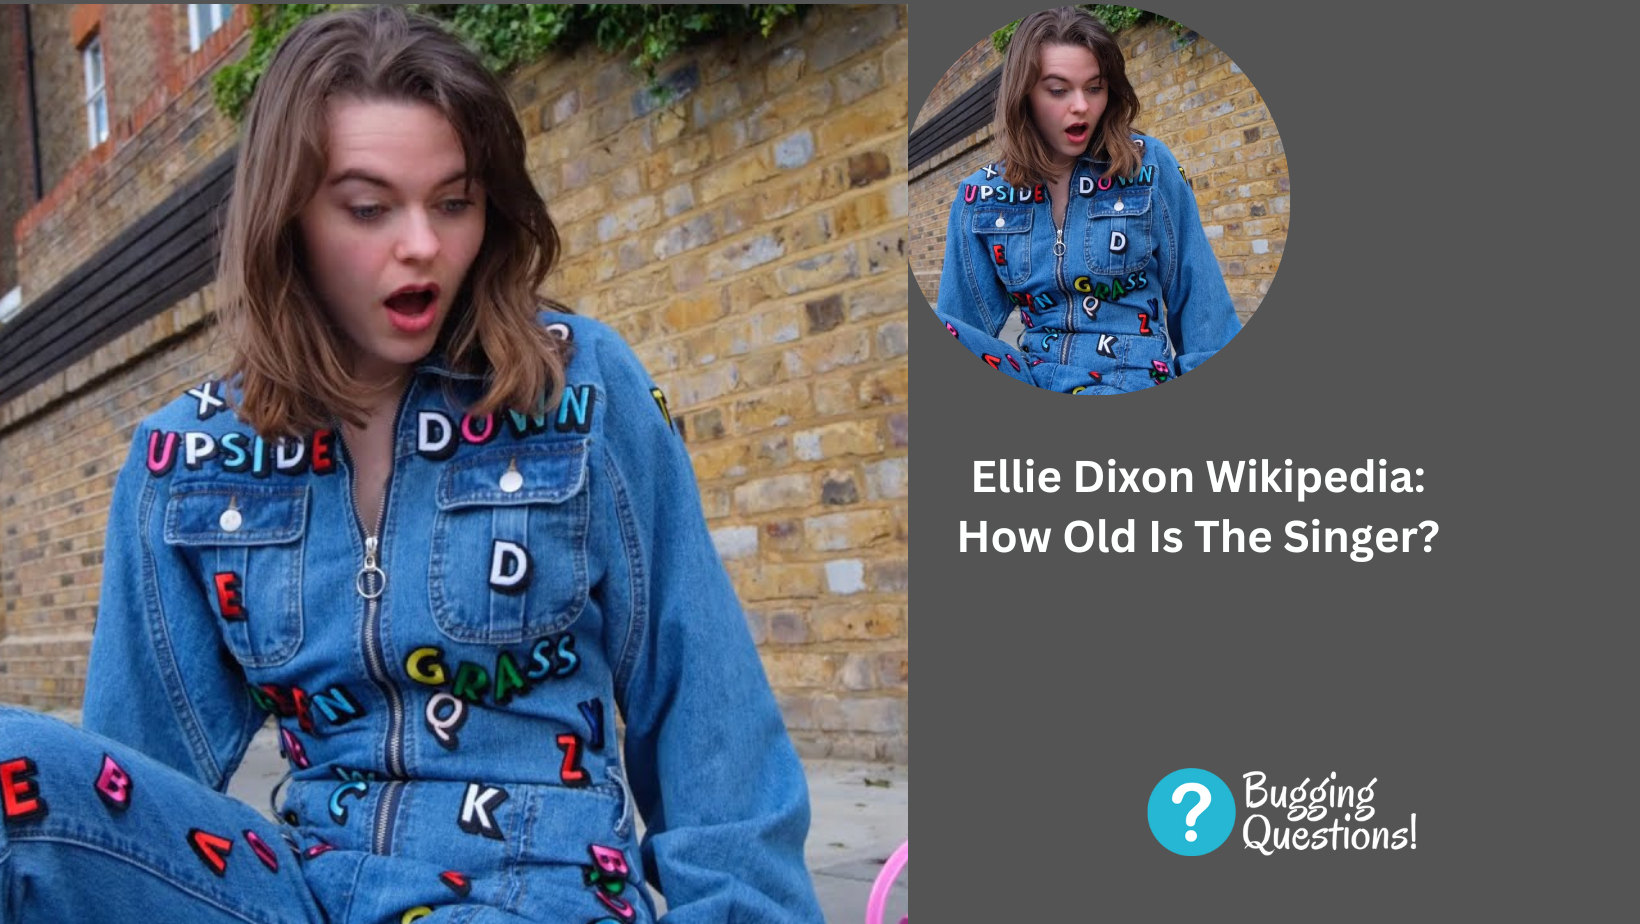 Ellie Dixon Wikipedia: How Old Is The Singer?